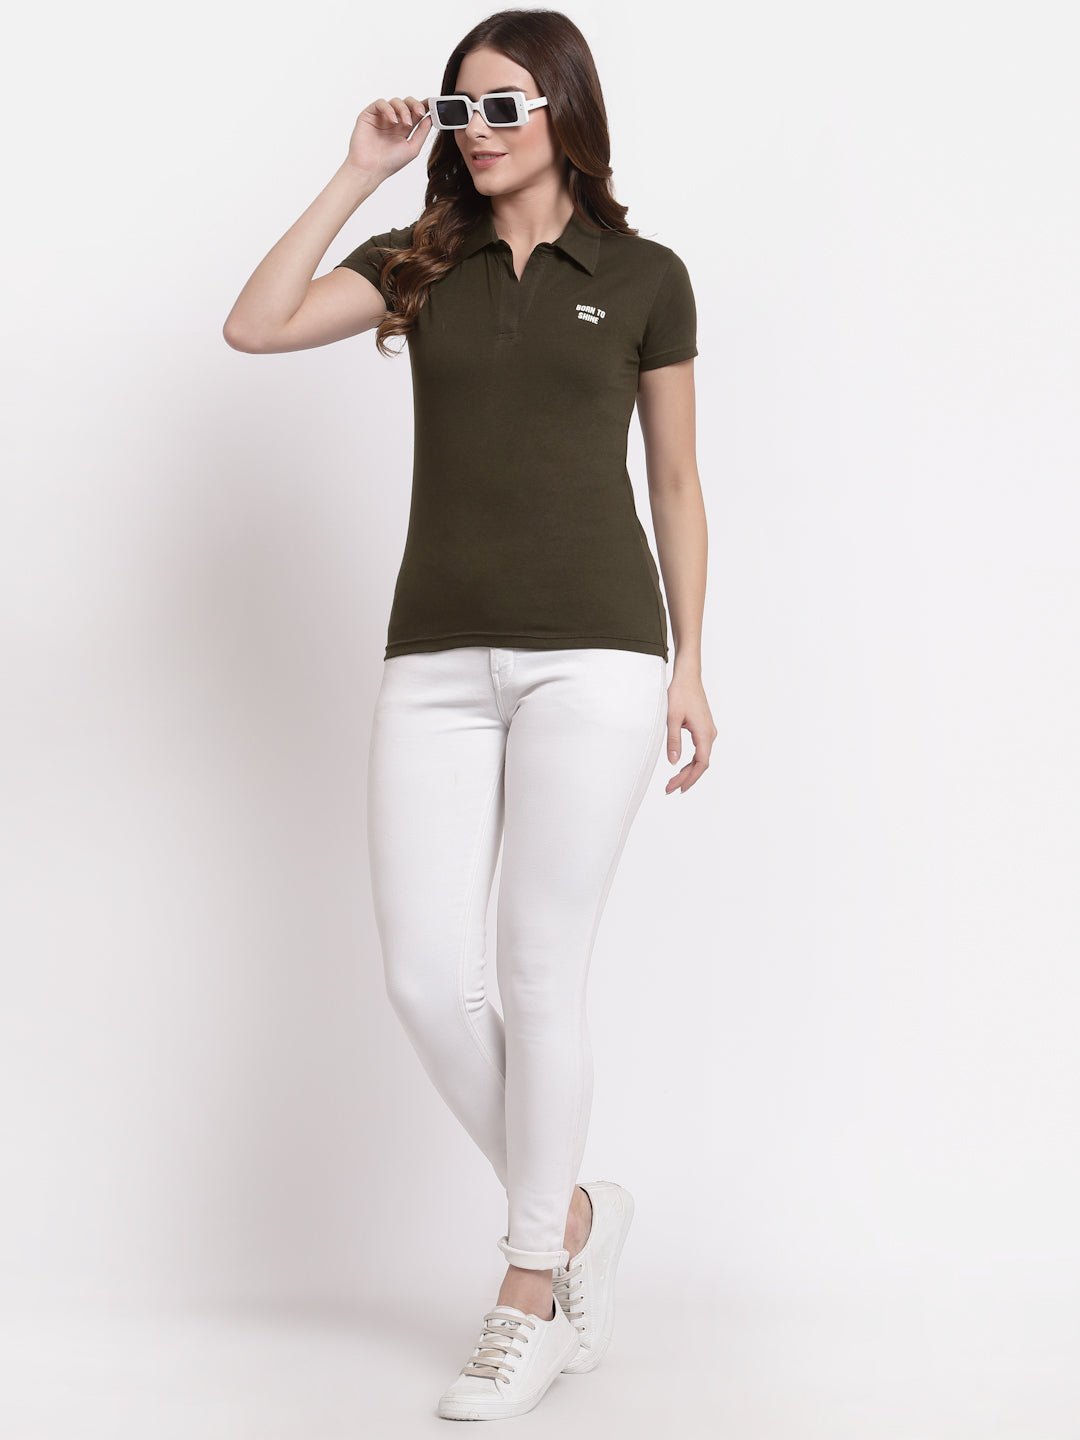 Olive Polo T-Shirt - clubyork